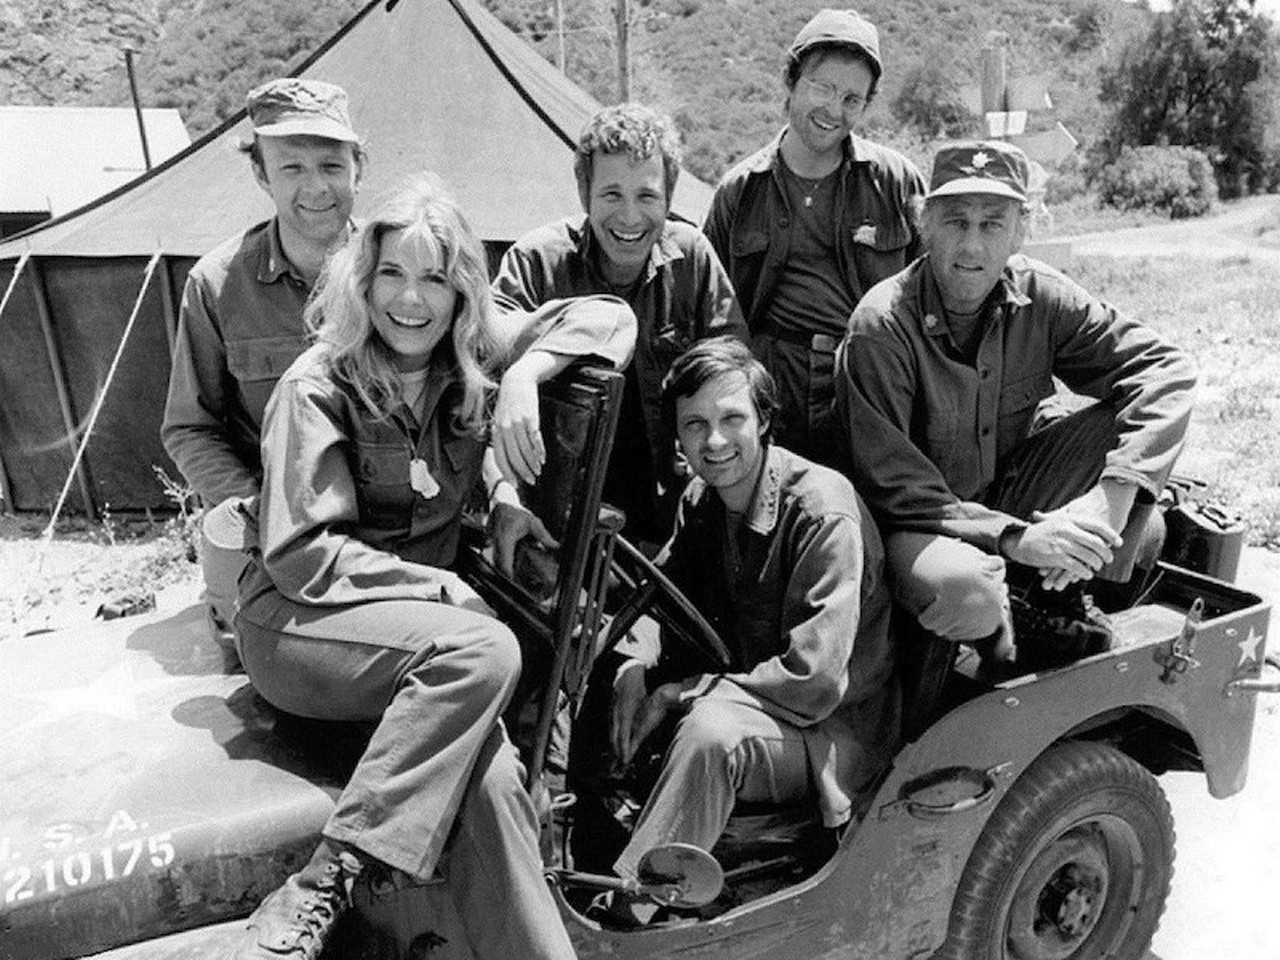 M*A*S*H ends its decade-long run on TV.
The comedy series' final episode aired in February 1983.